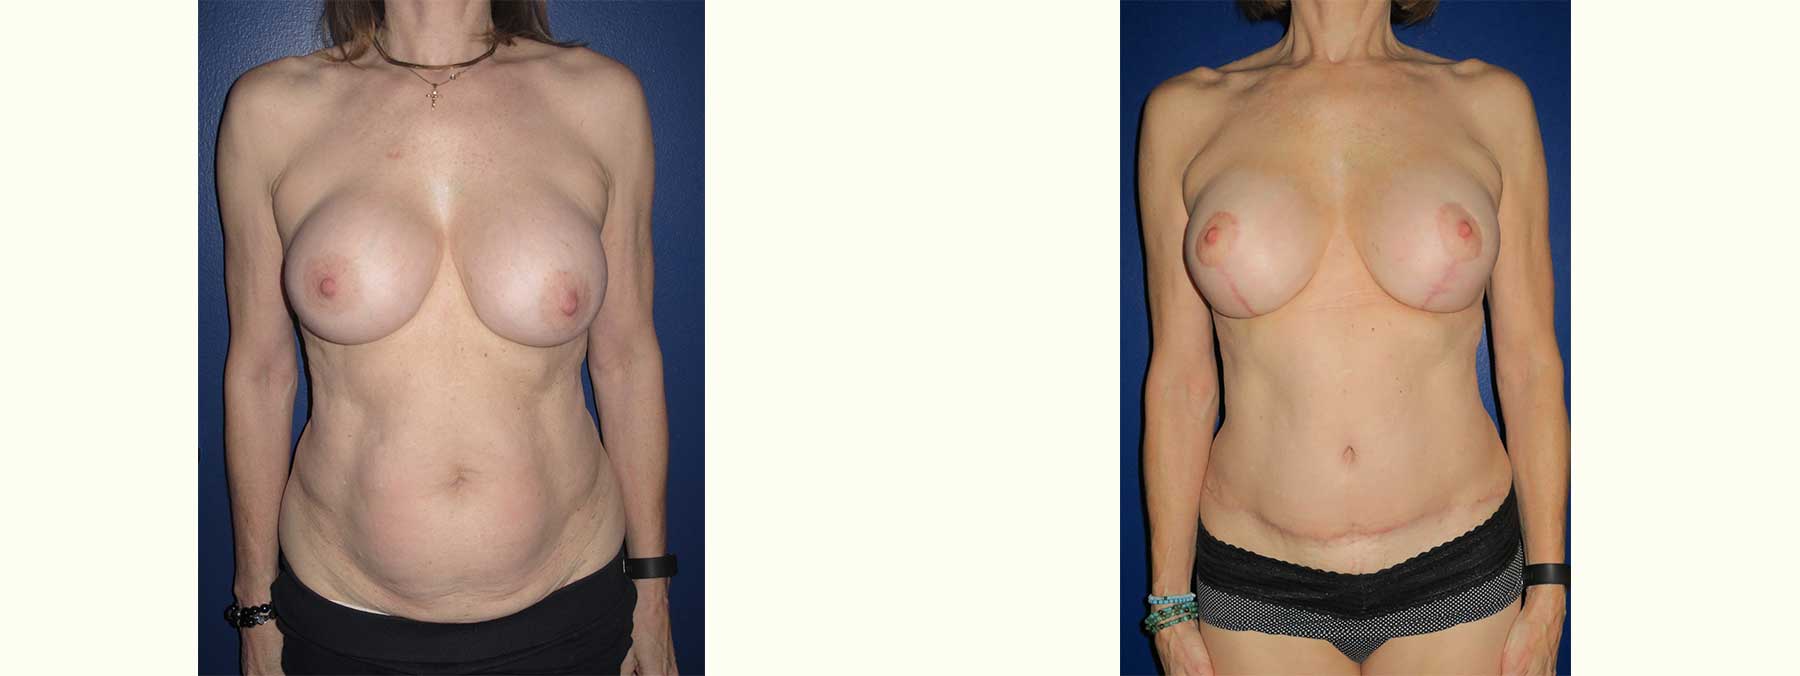 Before and After Image of Abdominoplasty